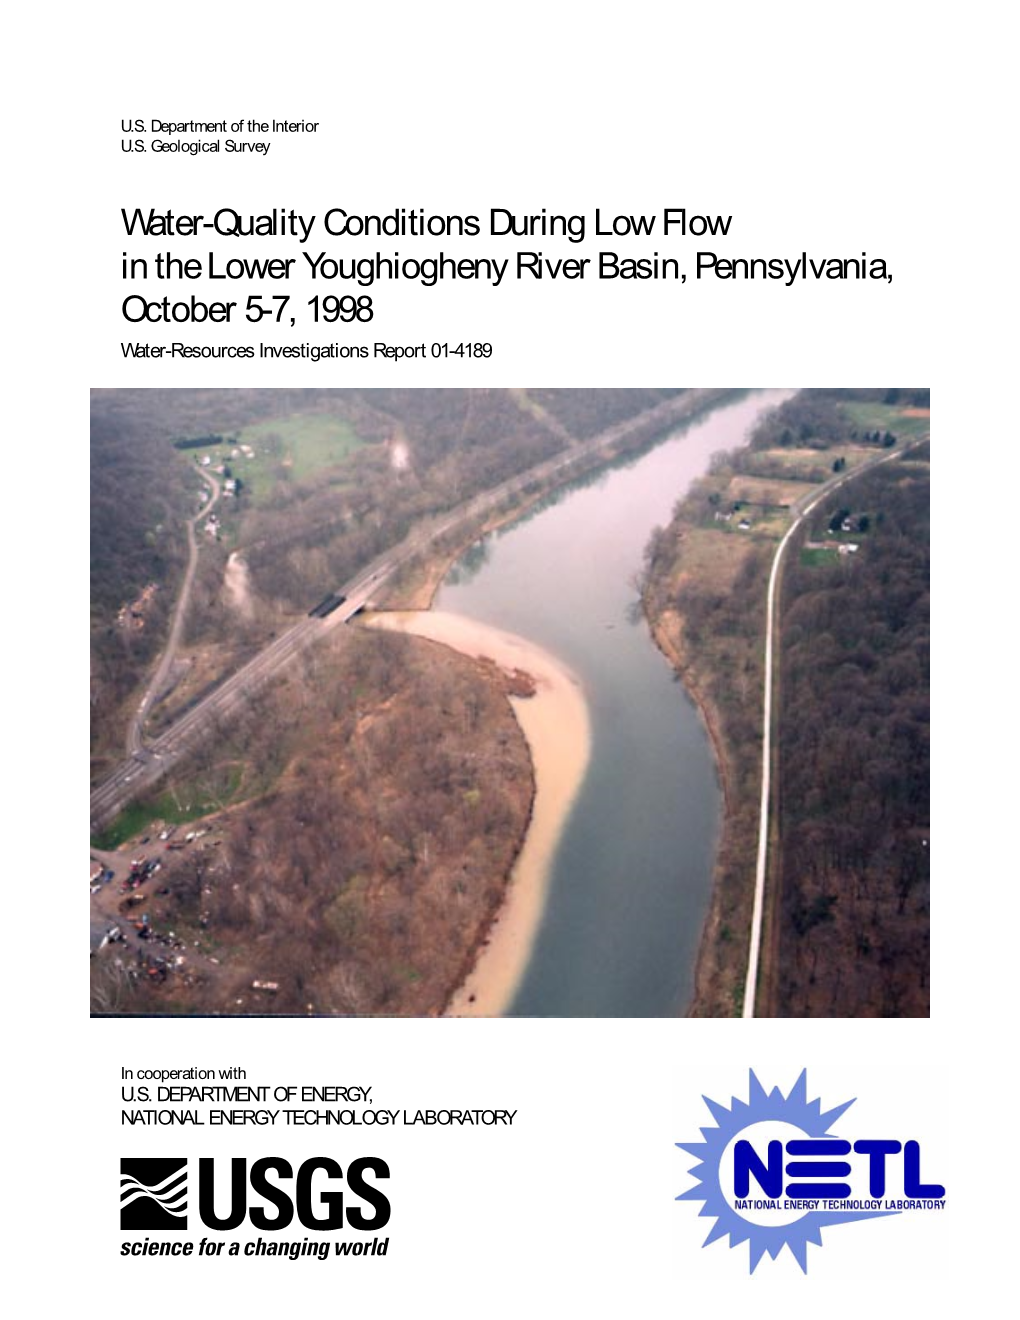 Water-Quality Conditions During Low Flow in the Lower Youghiogheny River Basin, Pennsylvania, October 5-7, 1998 Water-Resources Investigations Report 01-4189